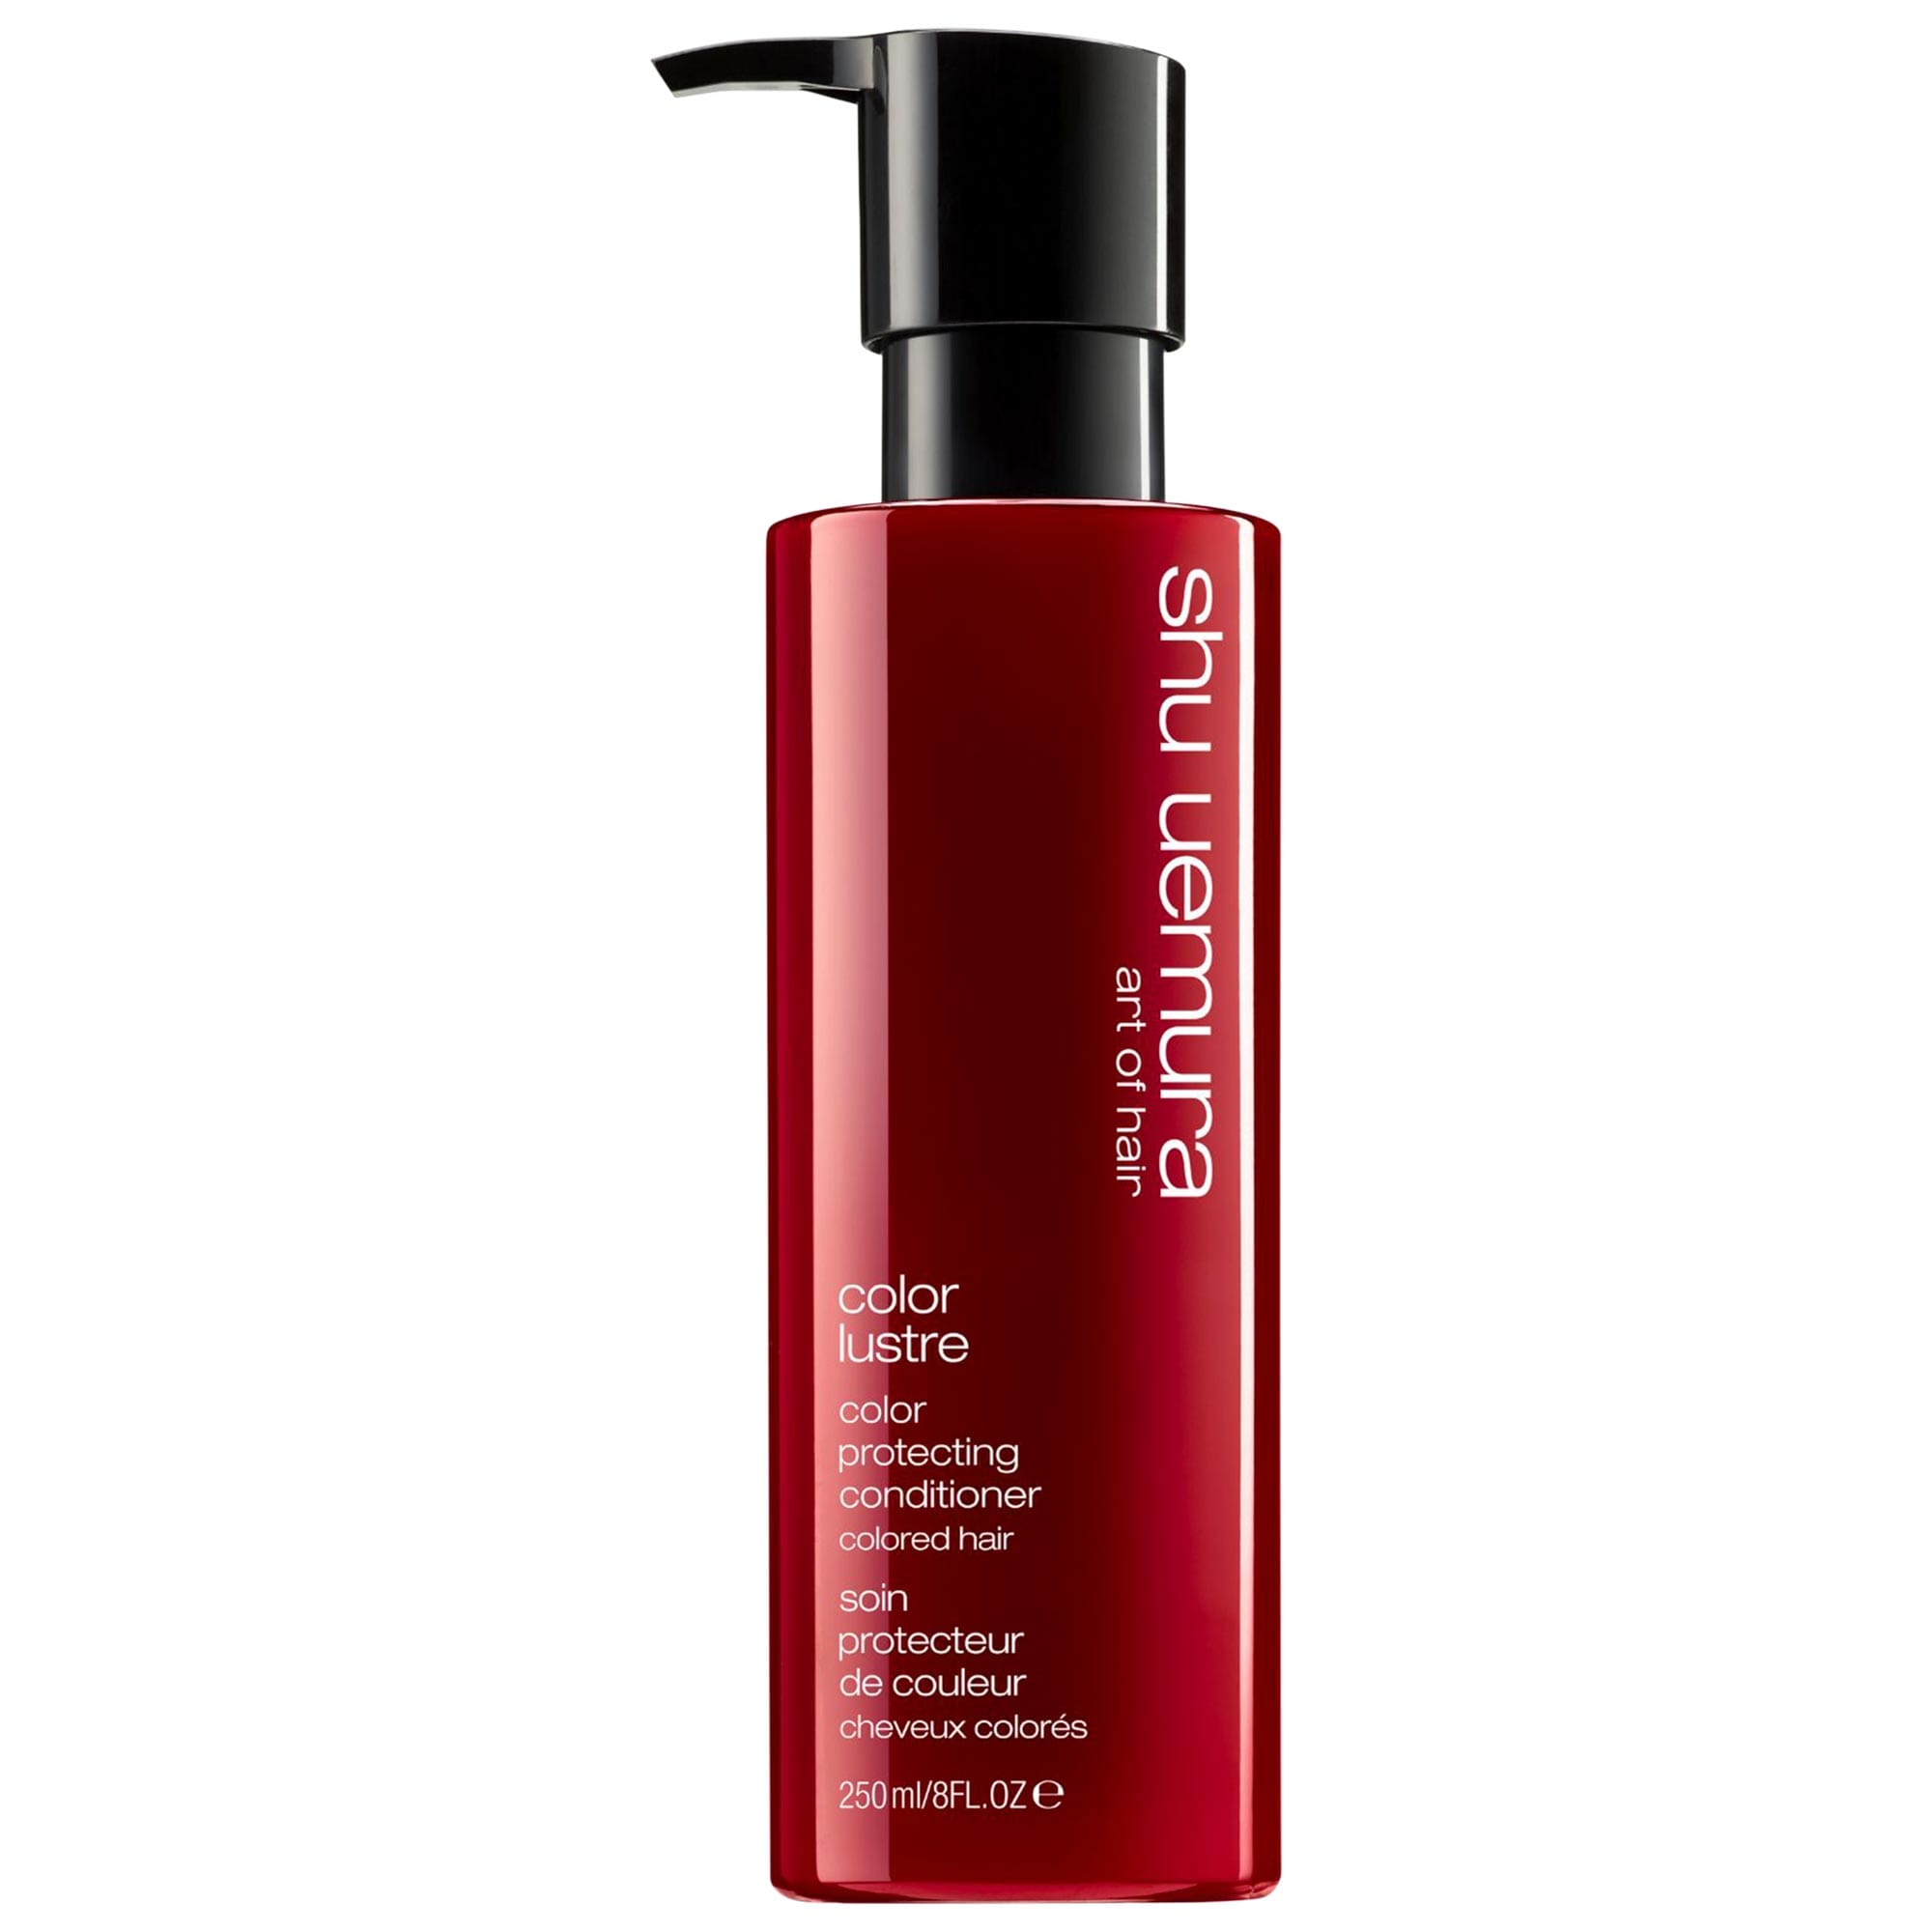 Color Lustre Conditioner for Color Treated Hair Shu uemura